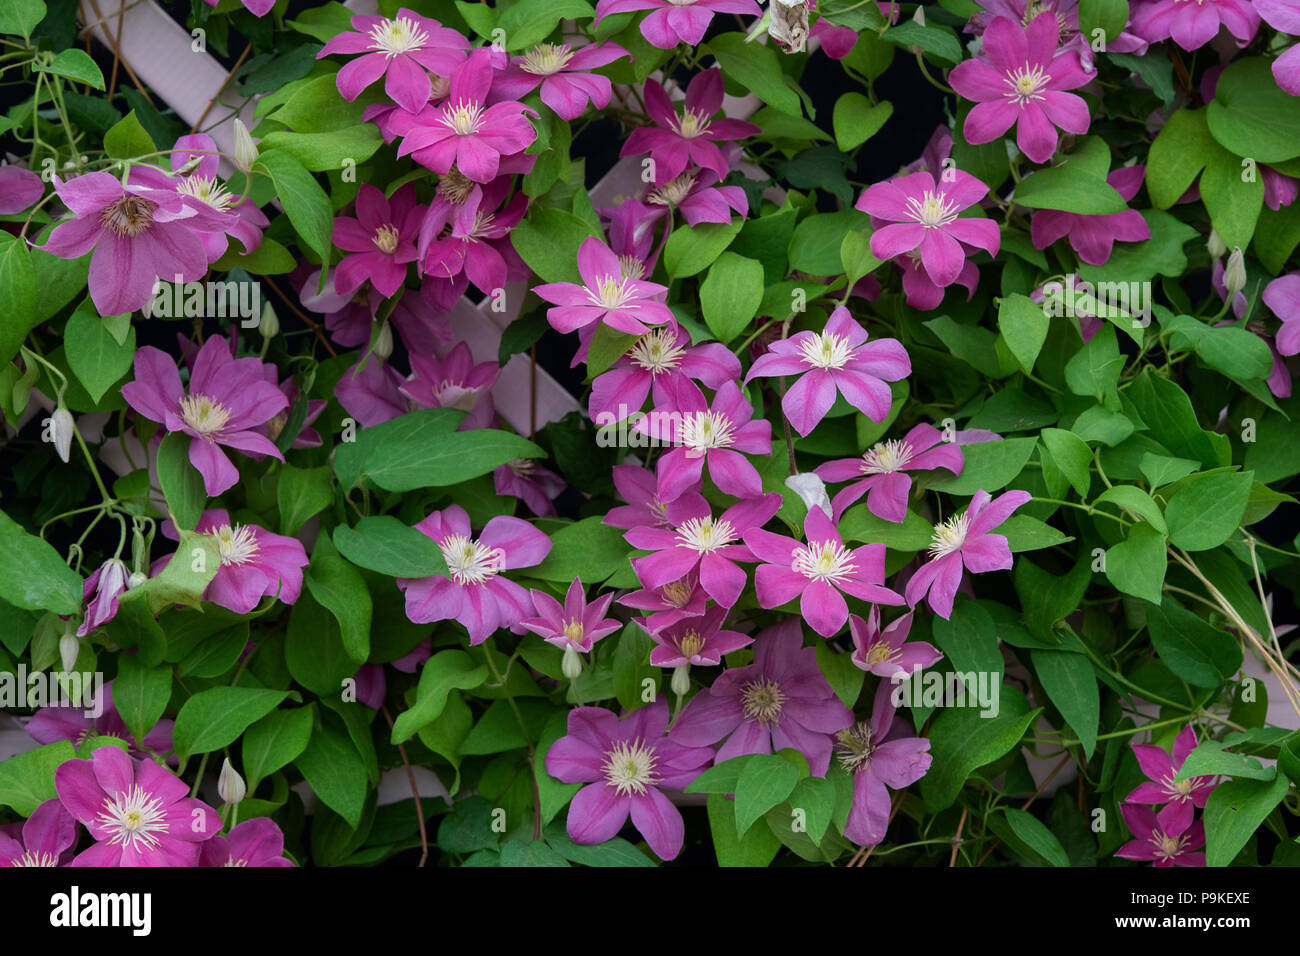 Clematis ‘Alaina' flowers. Early Large-Flowered Clematis Stock Photo